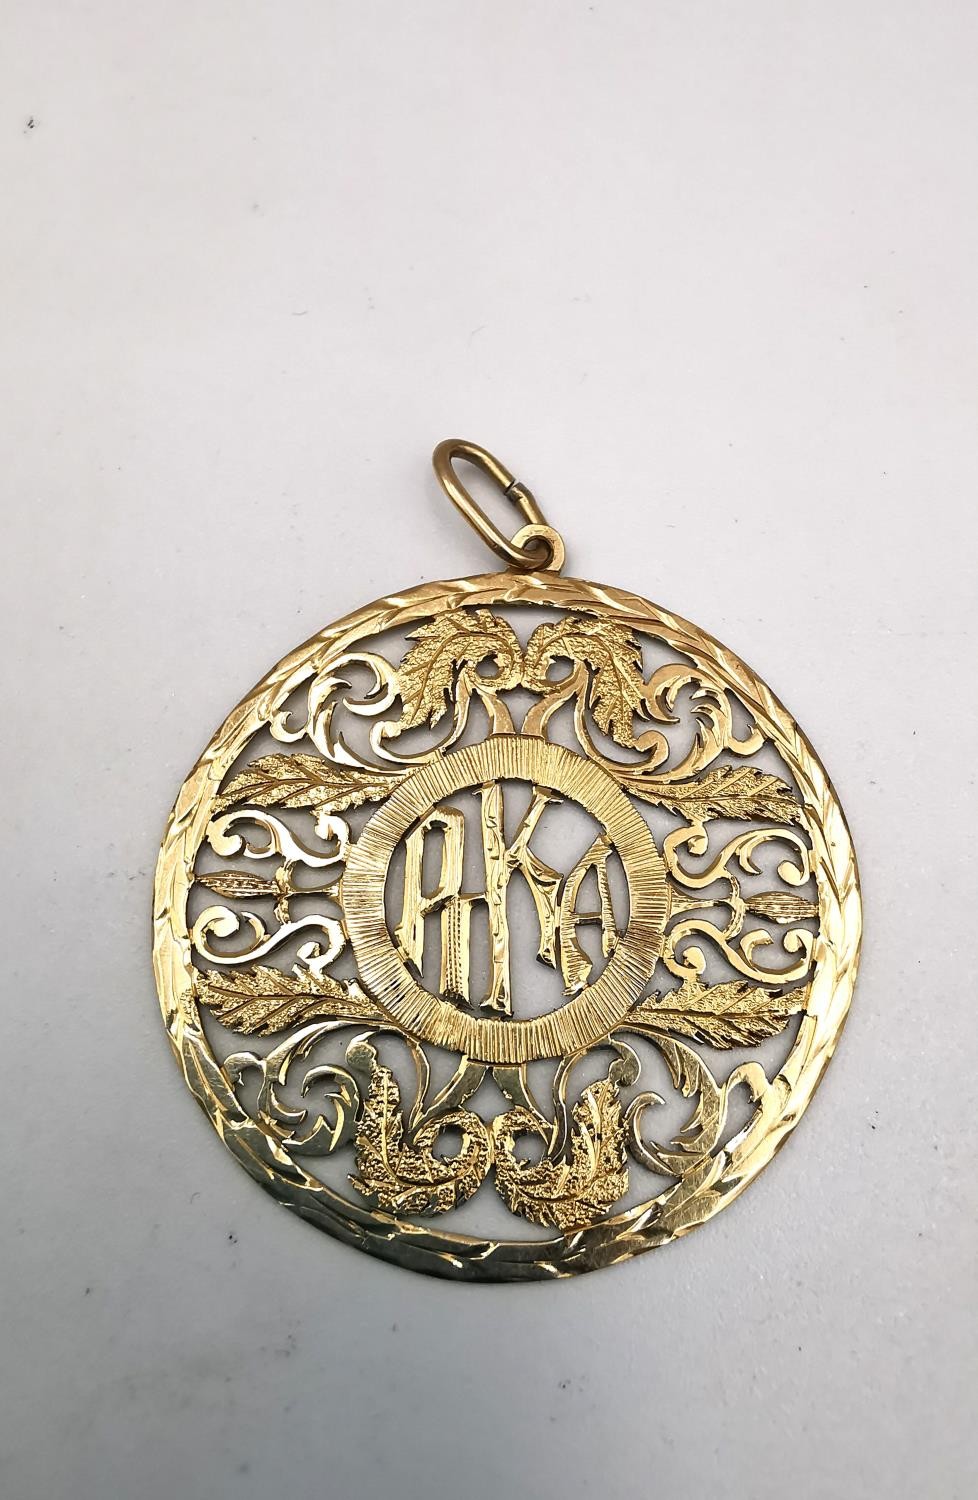 A gold plated pierced mongram pendant with acanthus leaf detailing. Diameter 4cm. Weight 5.06g - Image 2 of 5